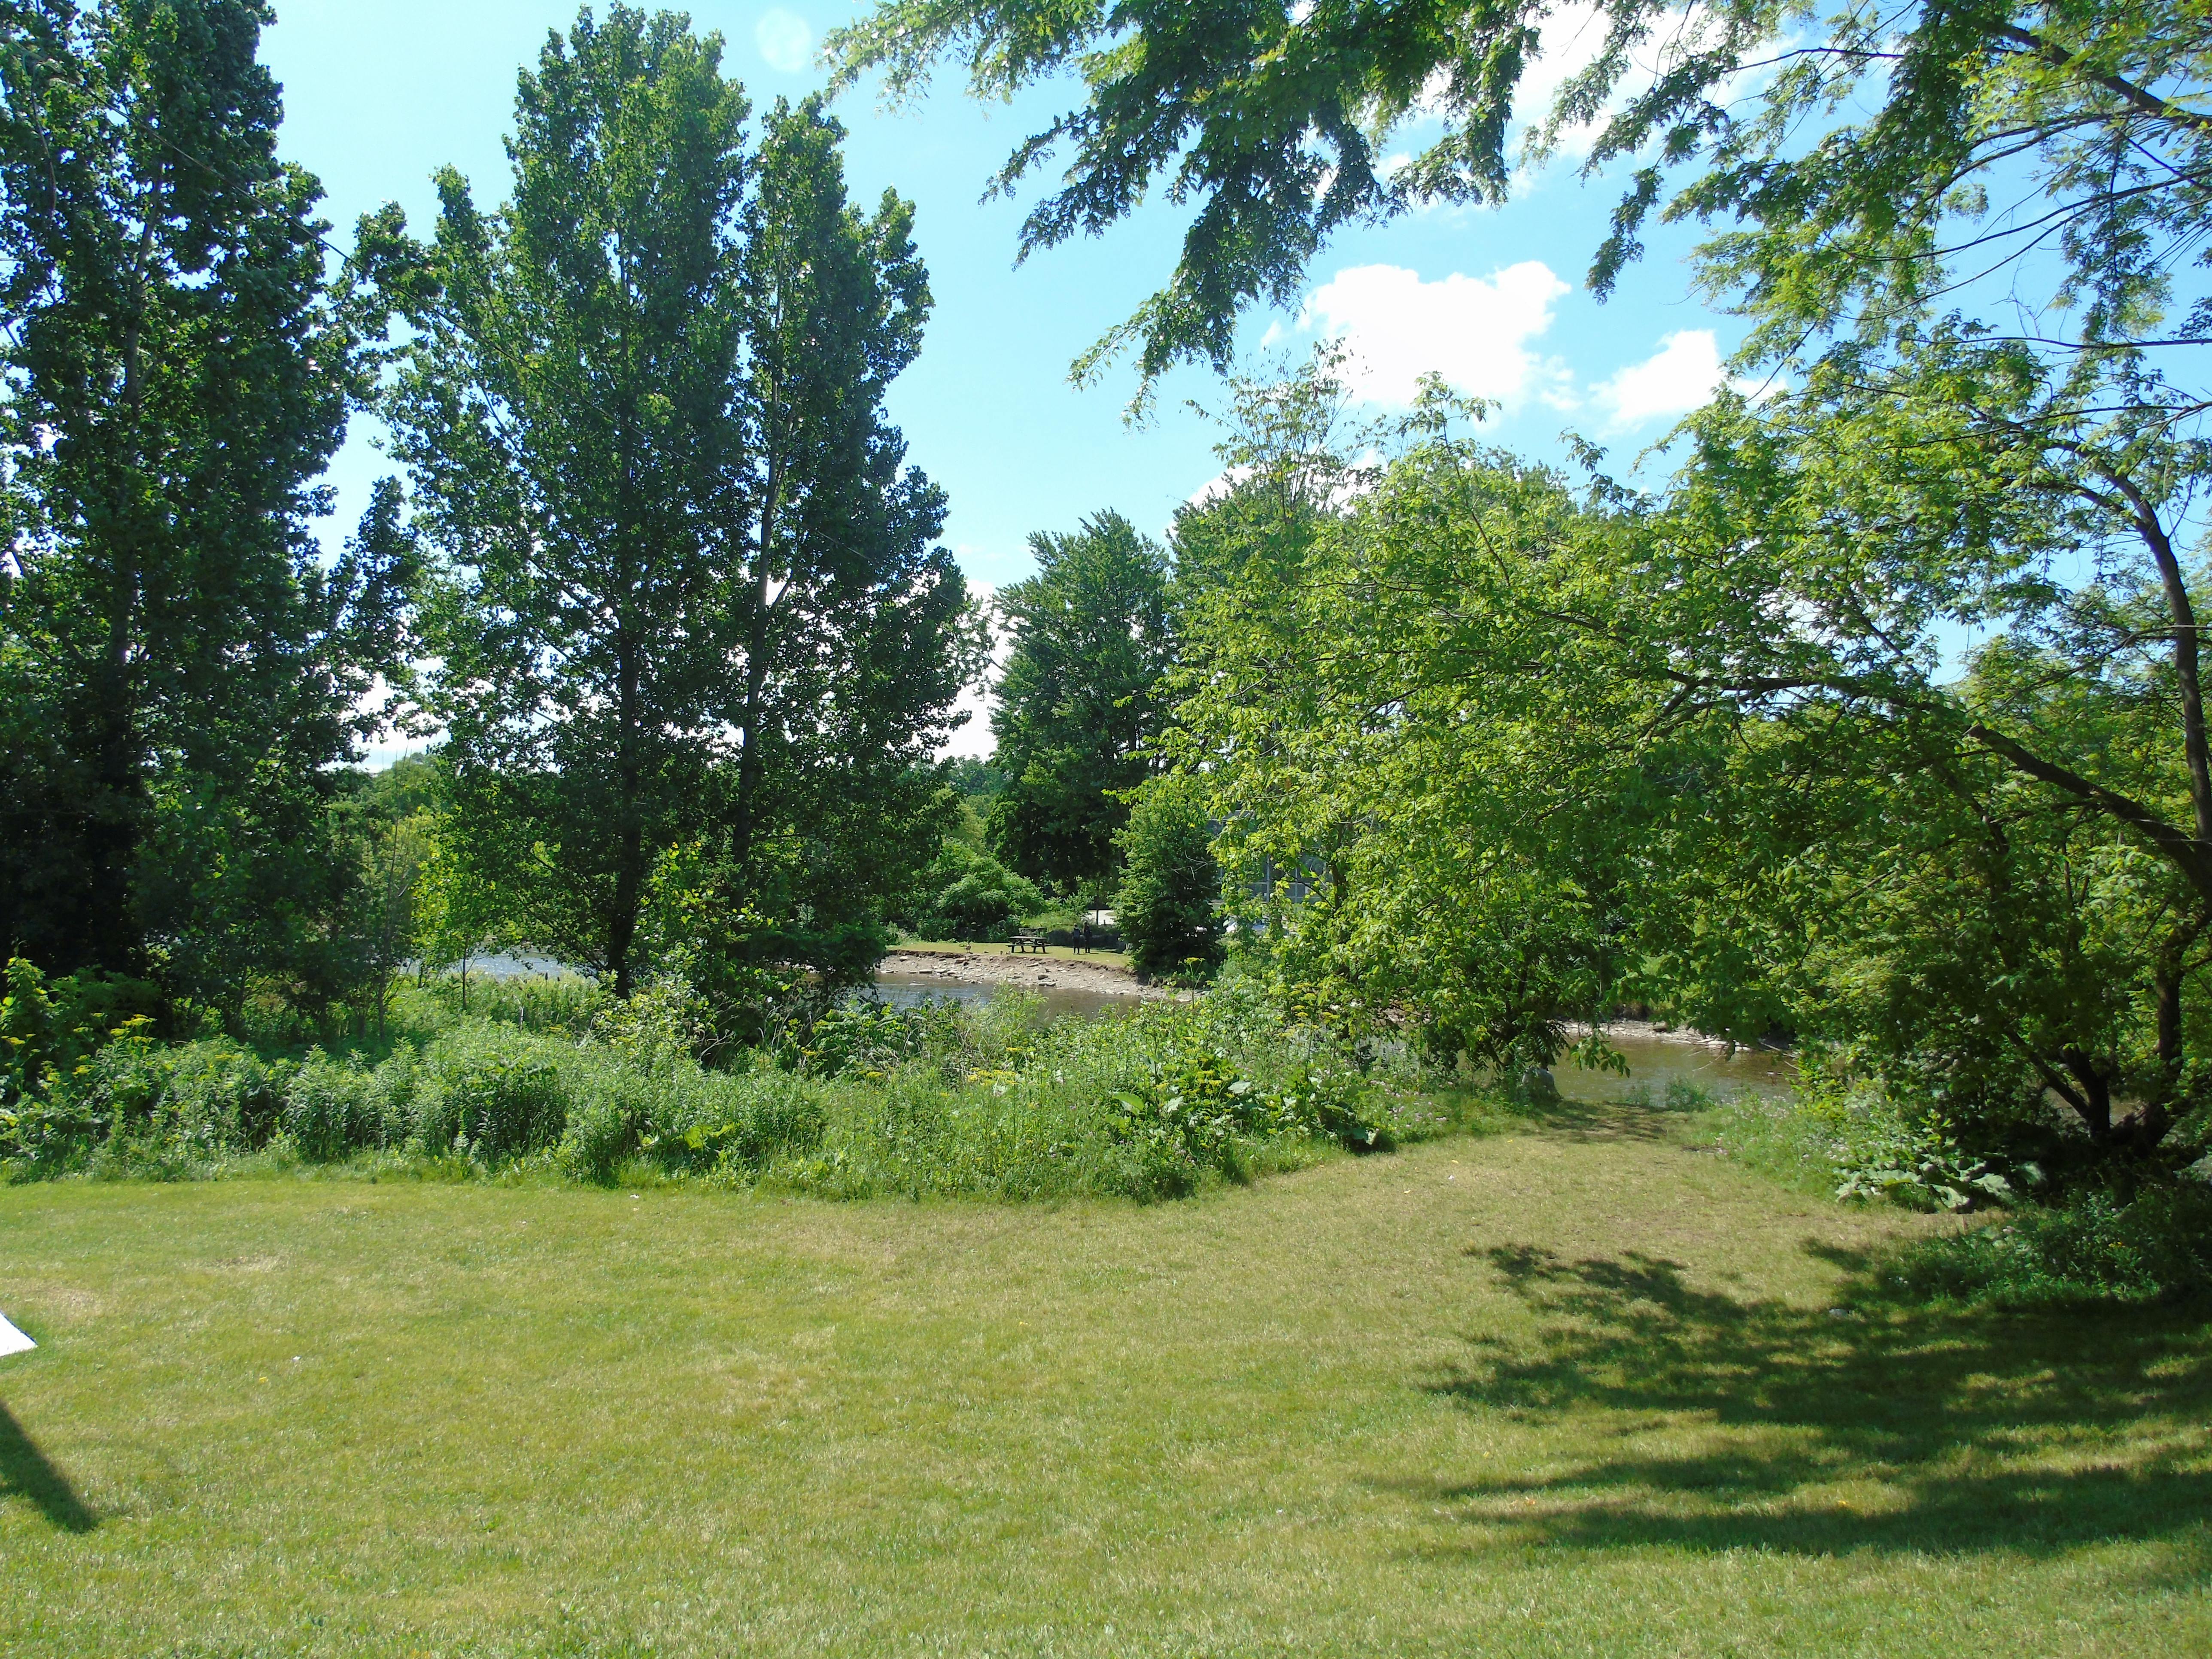 Trees and ecological features of the Credit River